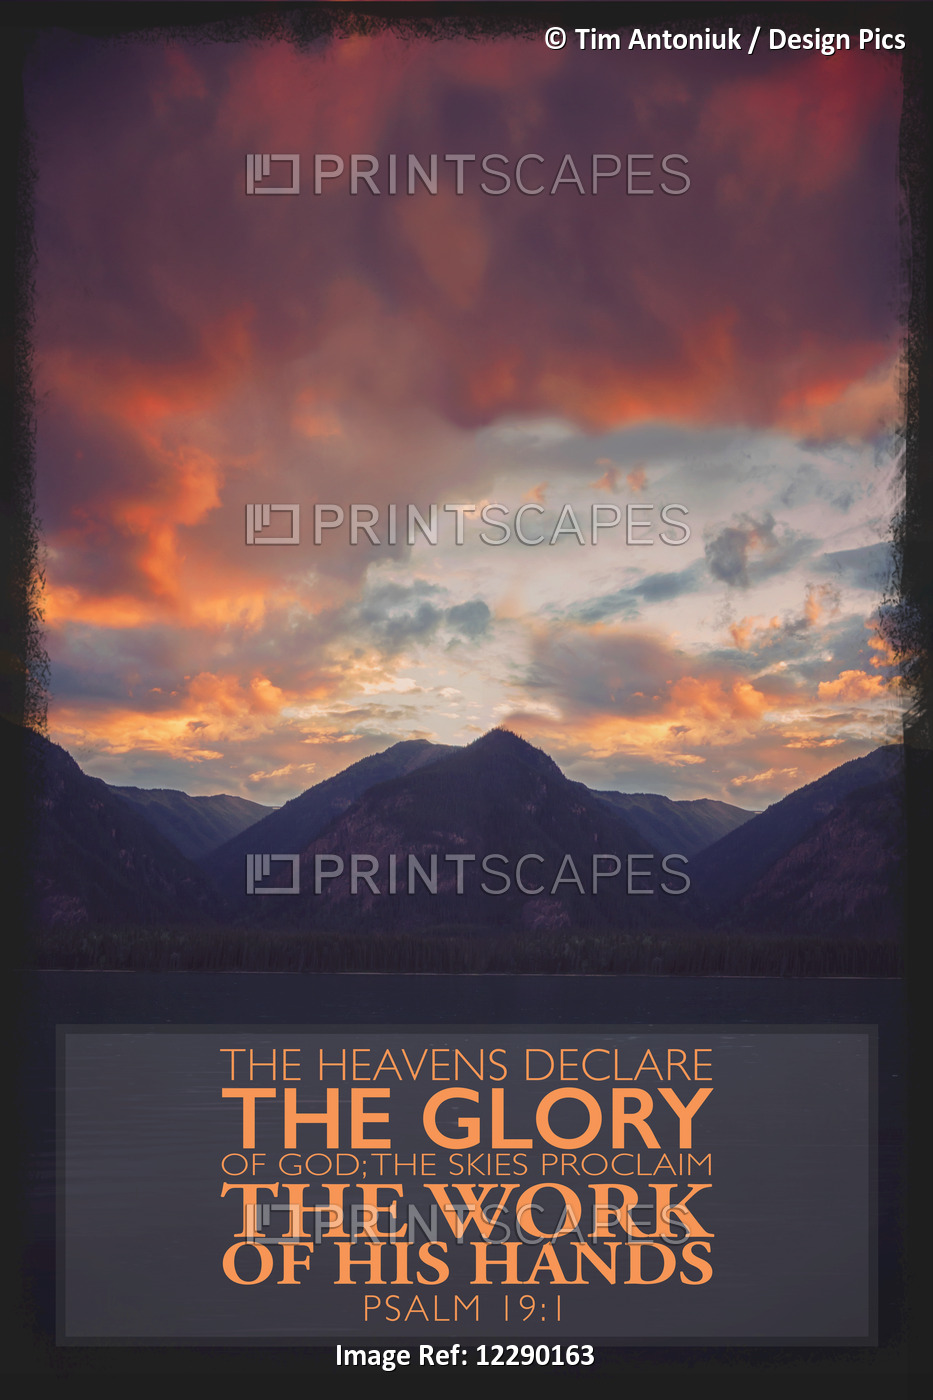 Image Of A Red Sky Over A Rugged Mountain Range With Scripture From Psalm 19:1